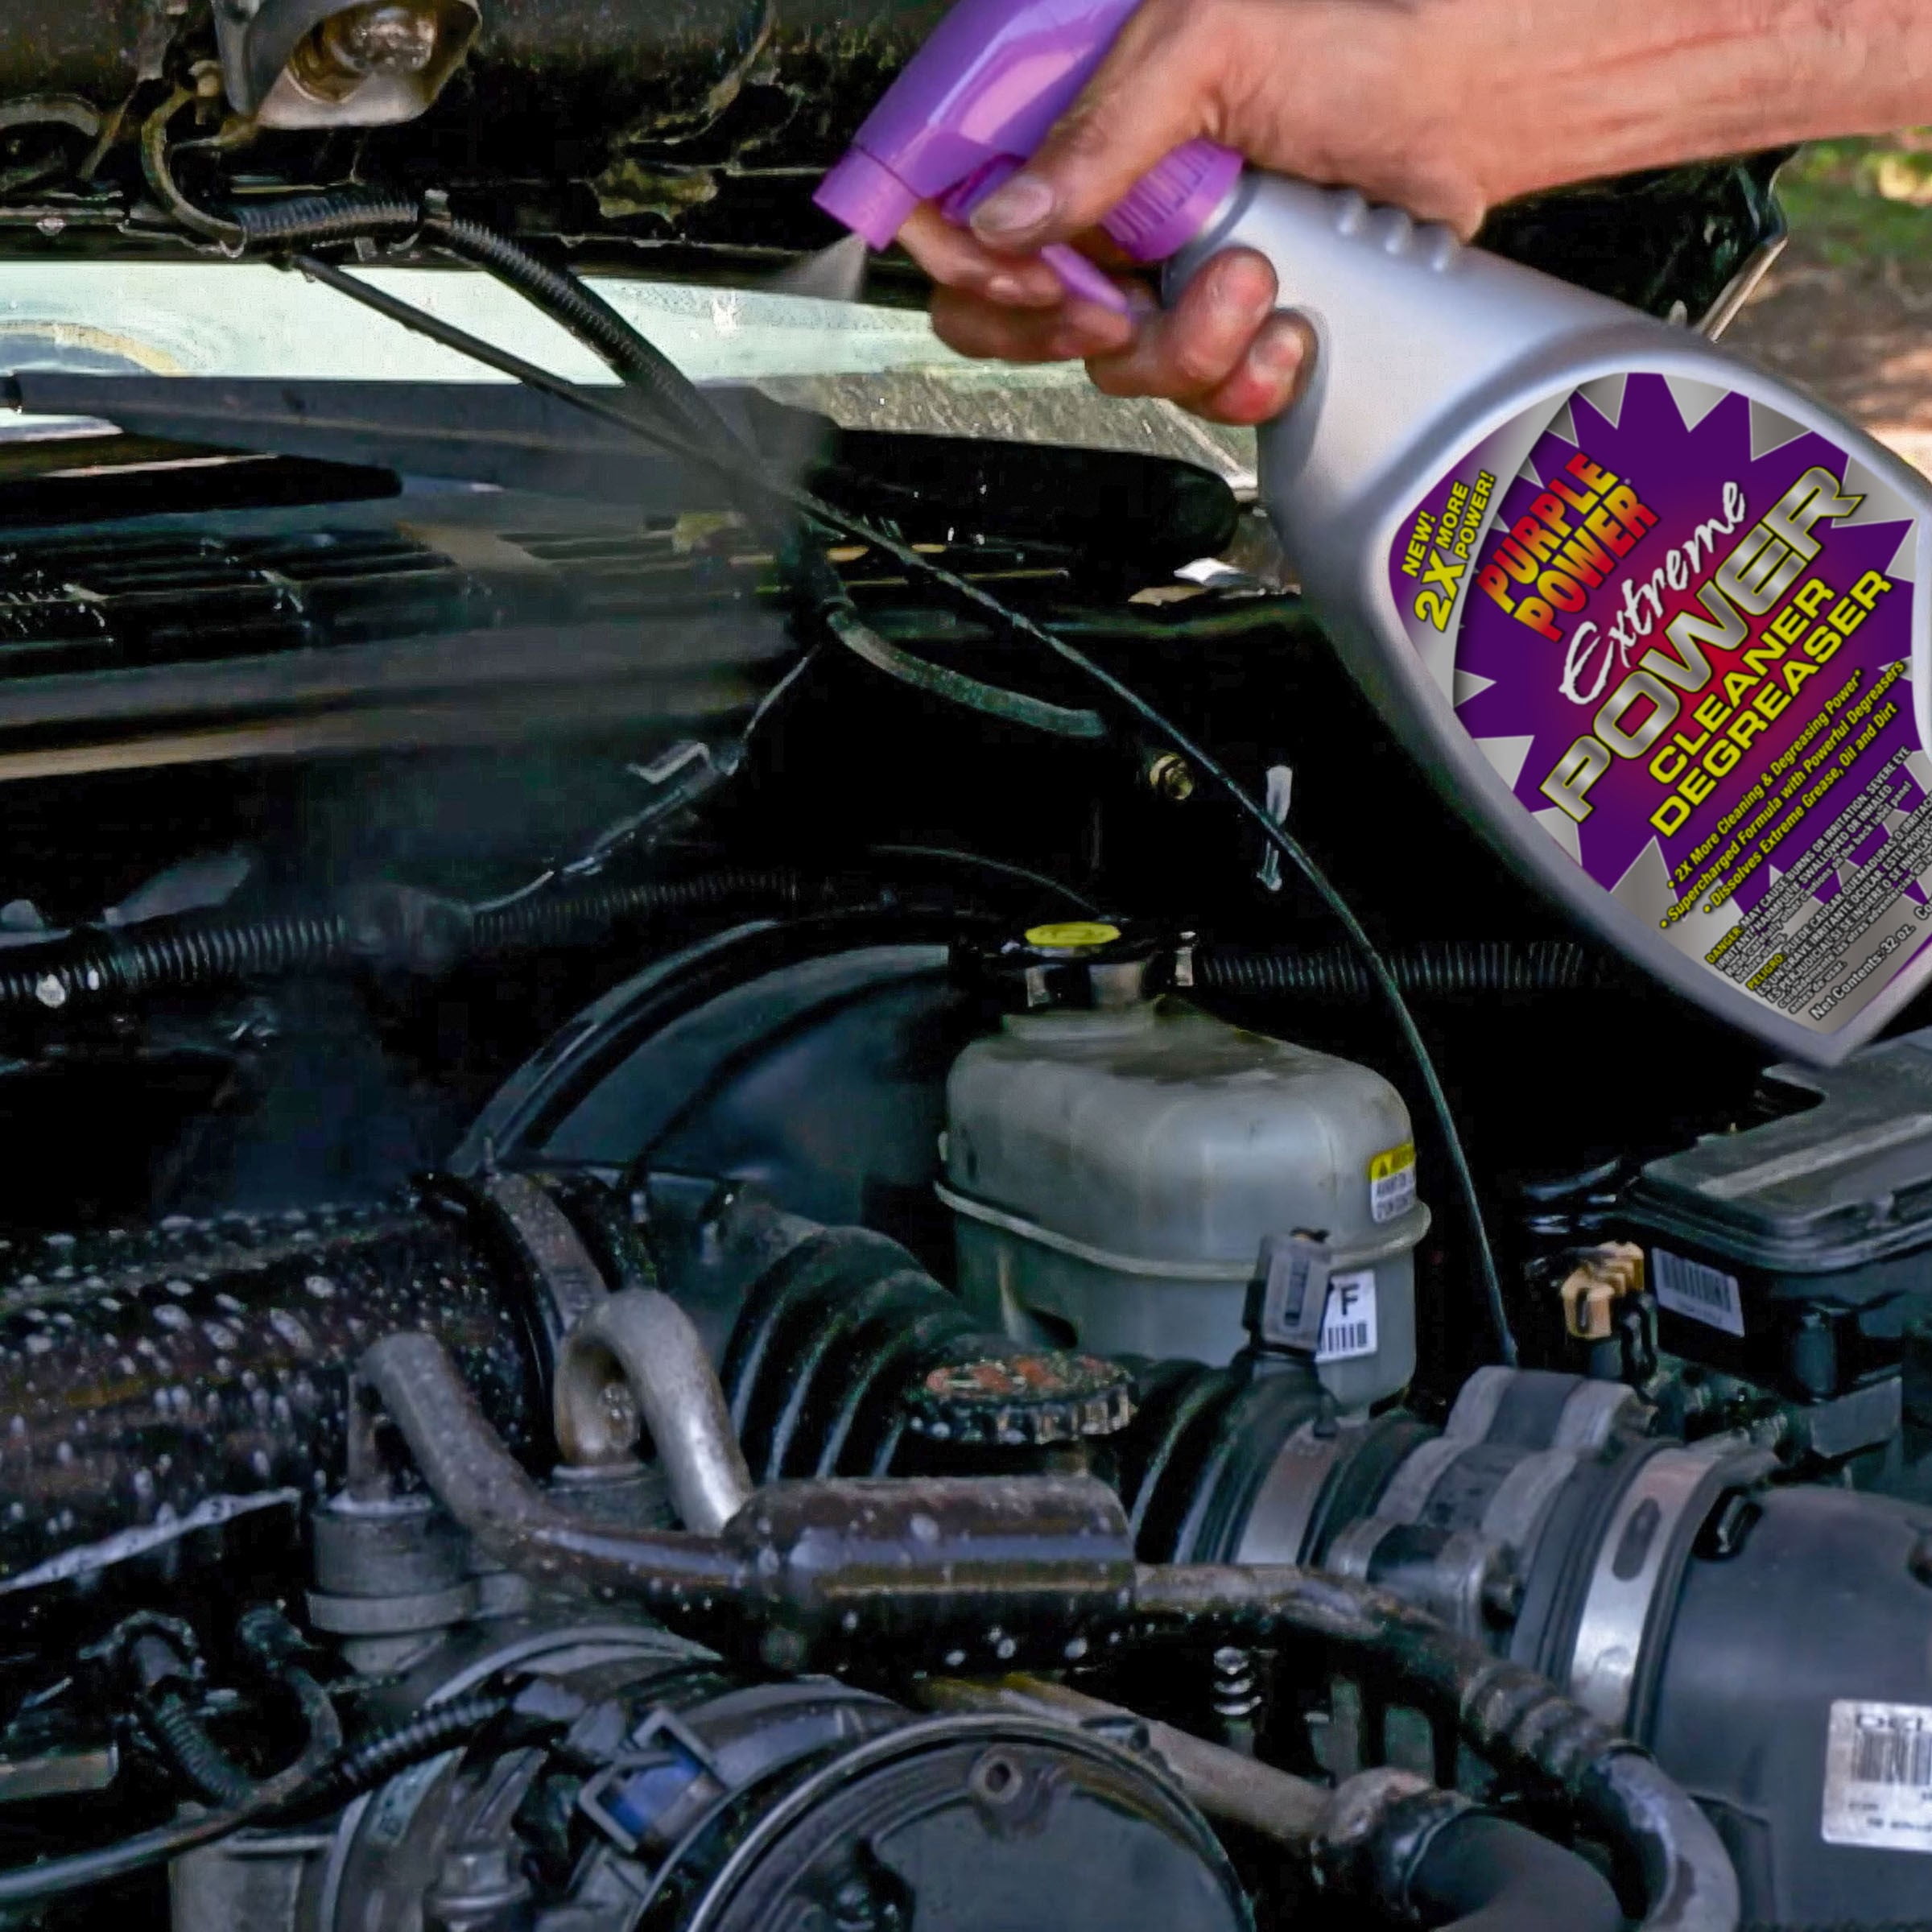 1) CASE OF PURPLE POWER DEGREASER - Jeff Martin Auctioneers, Inc.